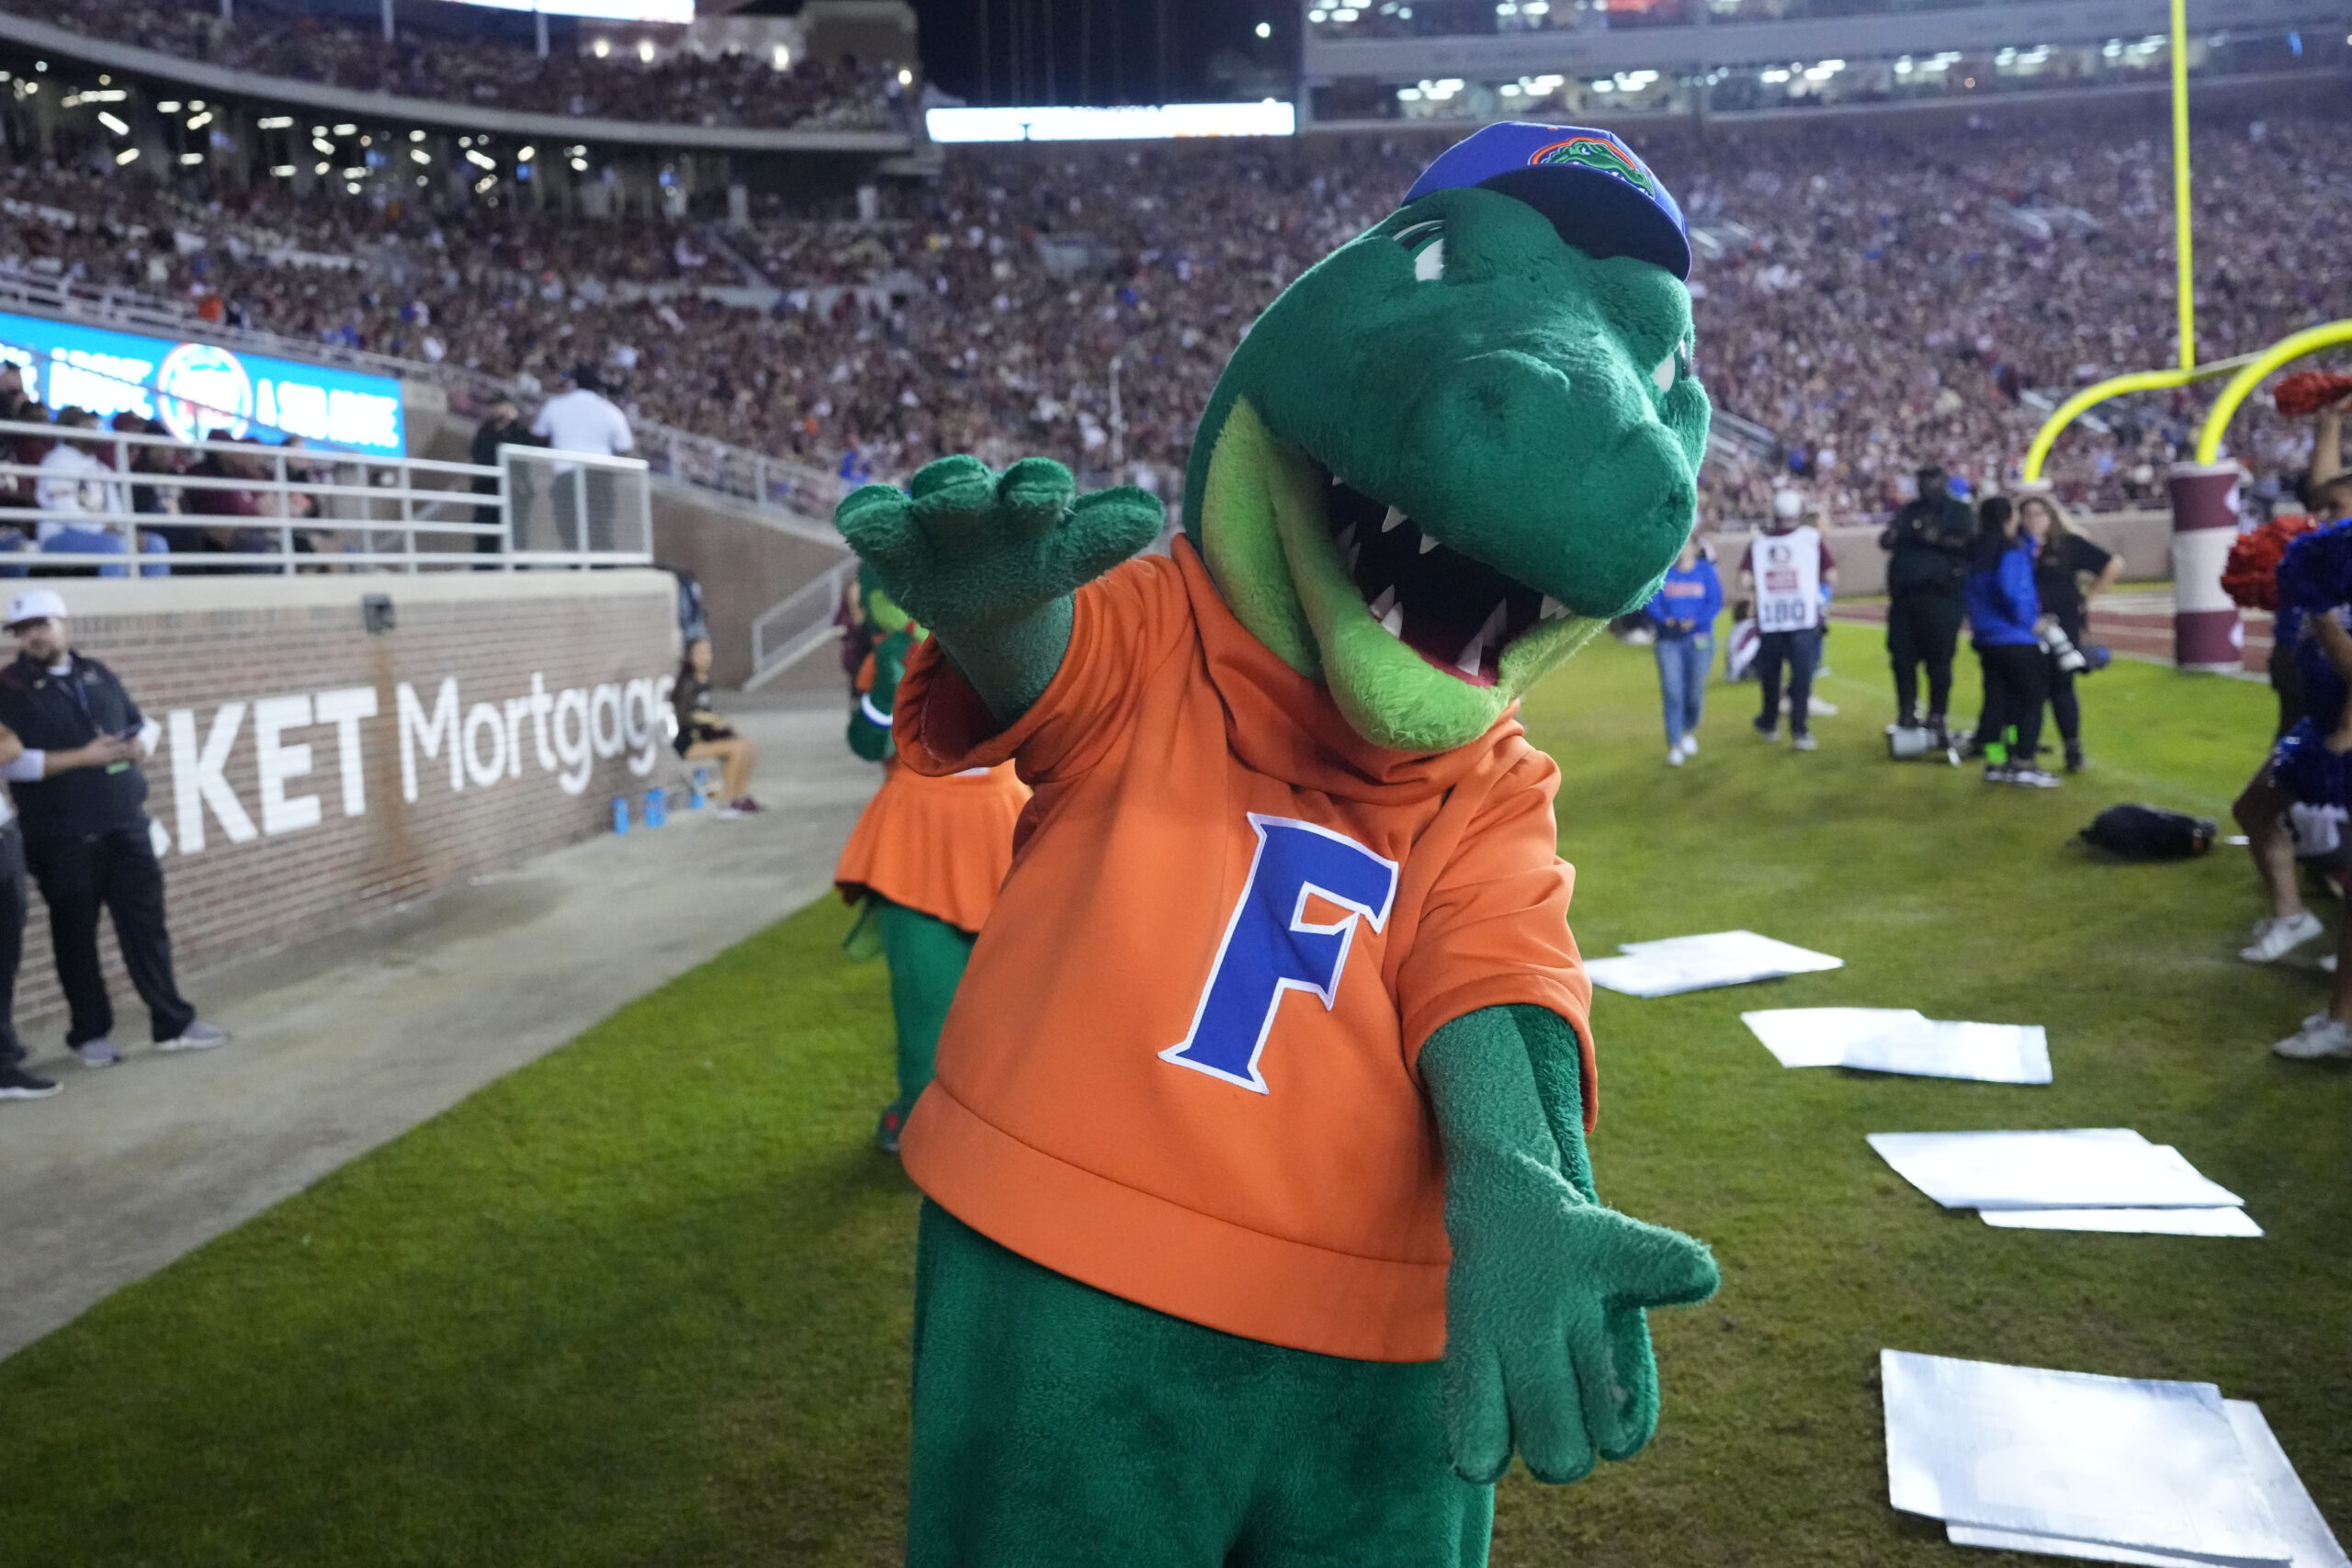 TALLAHASSEE, FL - NOVEMBER 25: The field goal mascot poses for a photo during the game between the Florida Gators and the Florida State Seminoles on Friday, November 25, 2022 at Bobby Bowden Field at Doak Campbell Stadium (Photo by Peter Joneleit/Icon Sportswire via Getty Images)